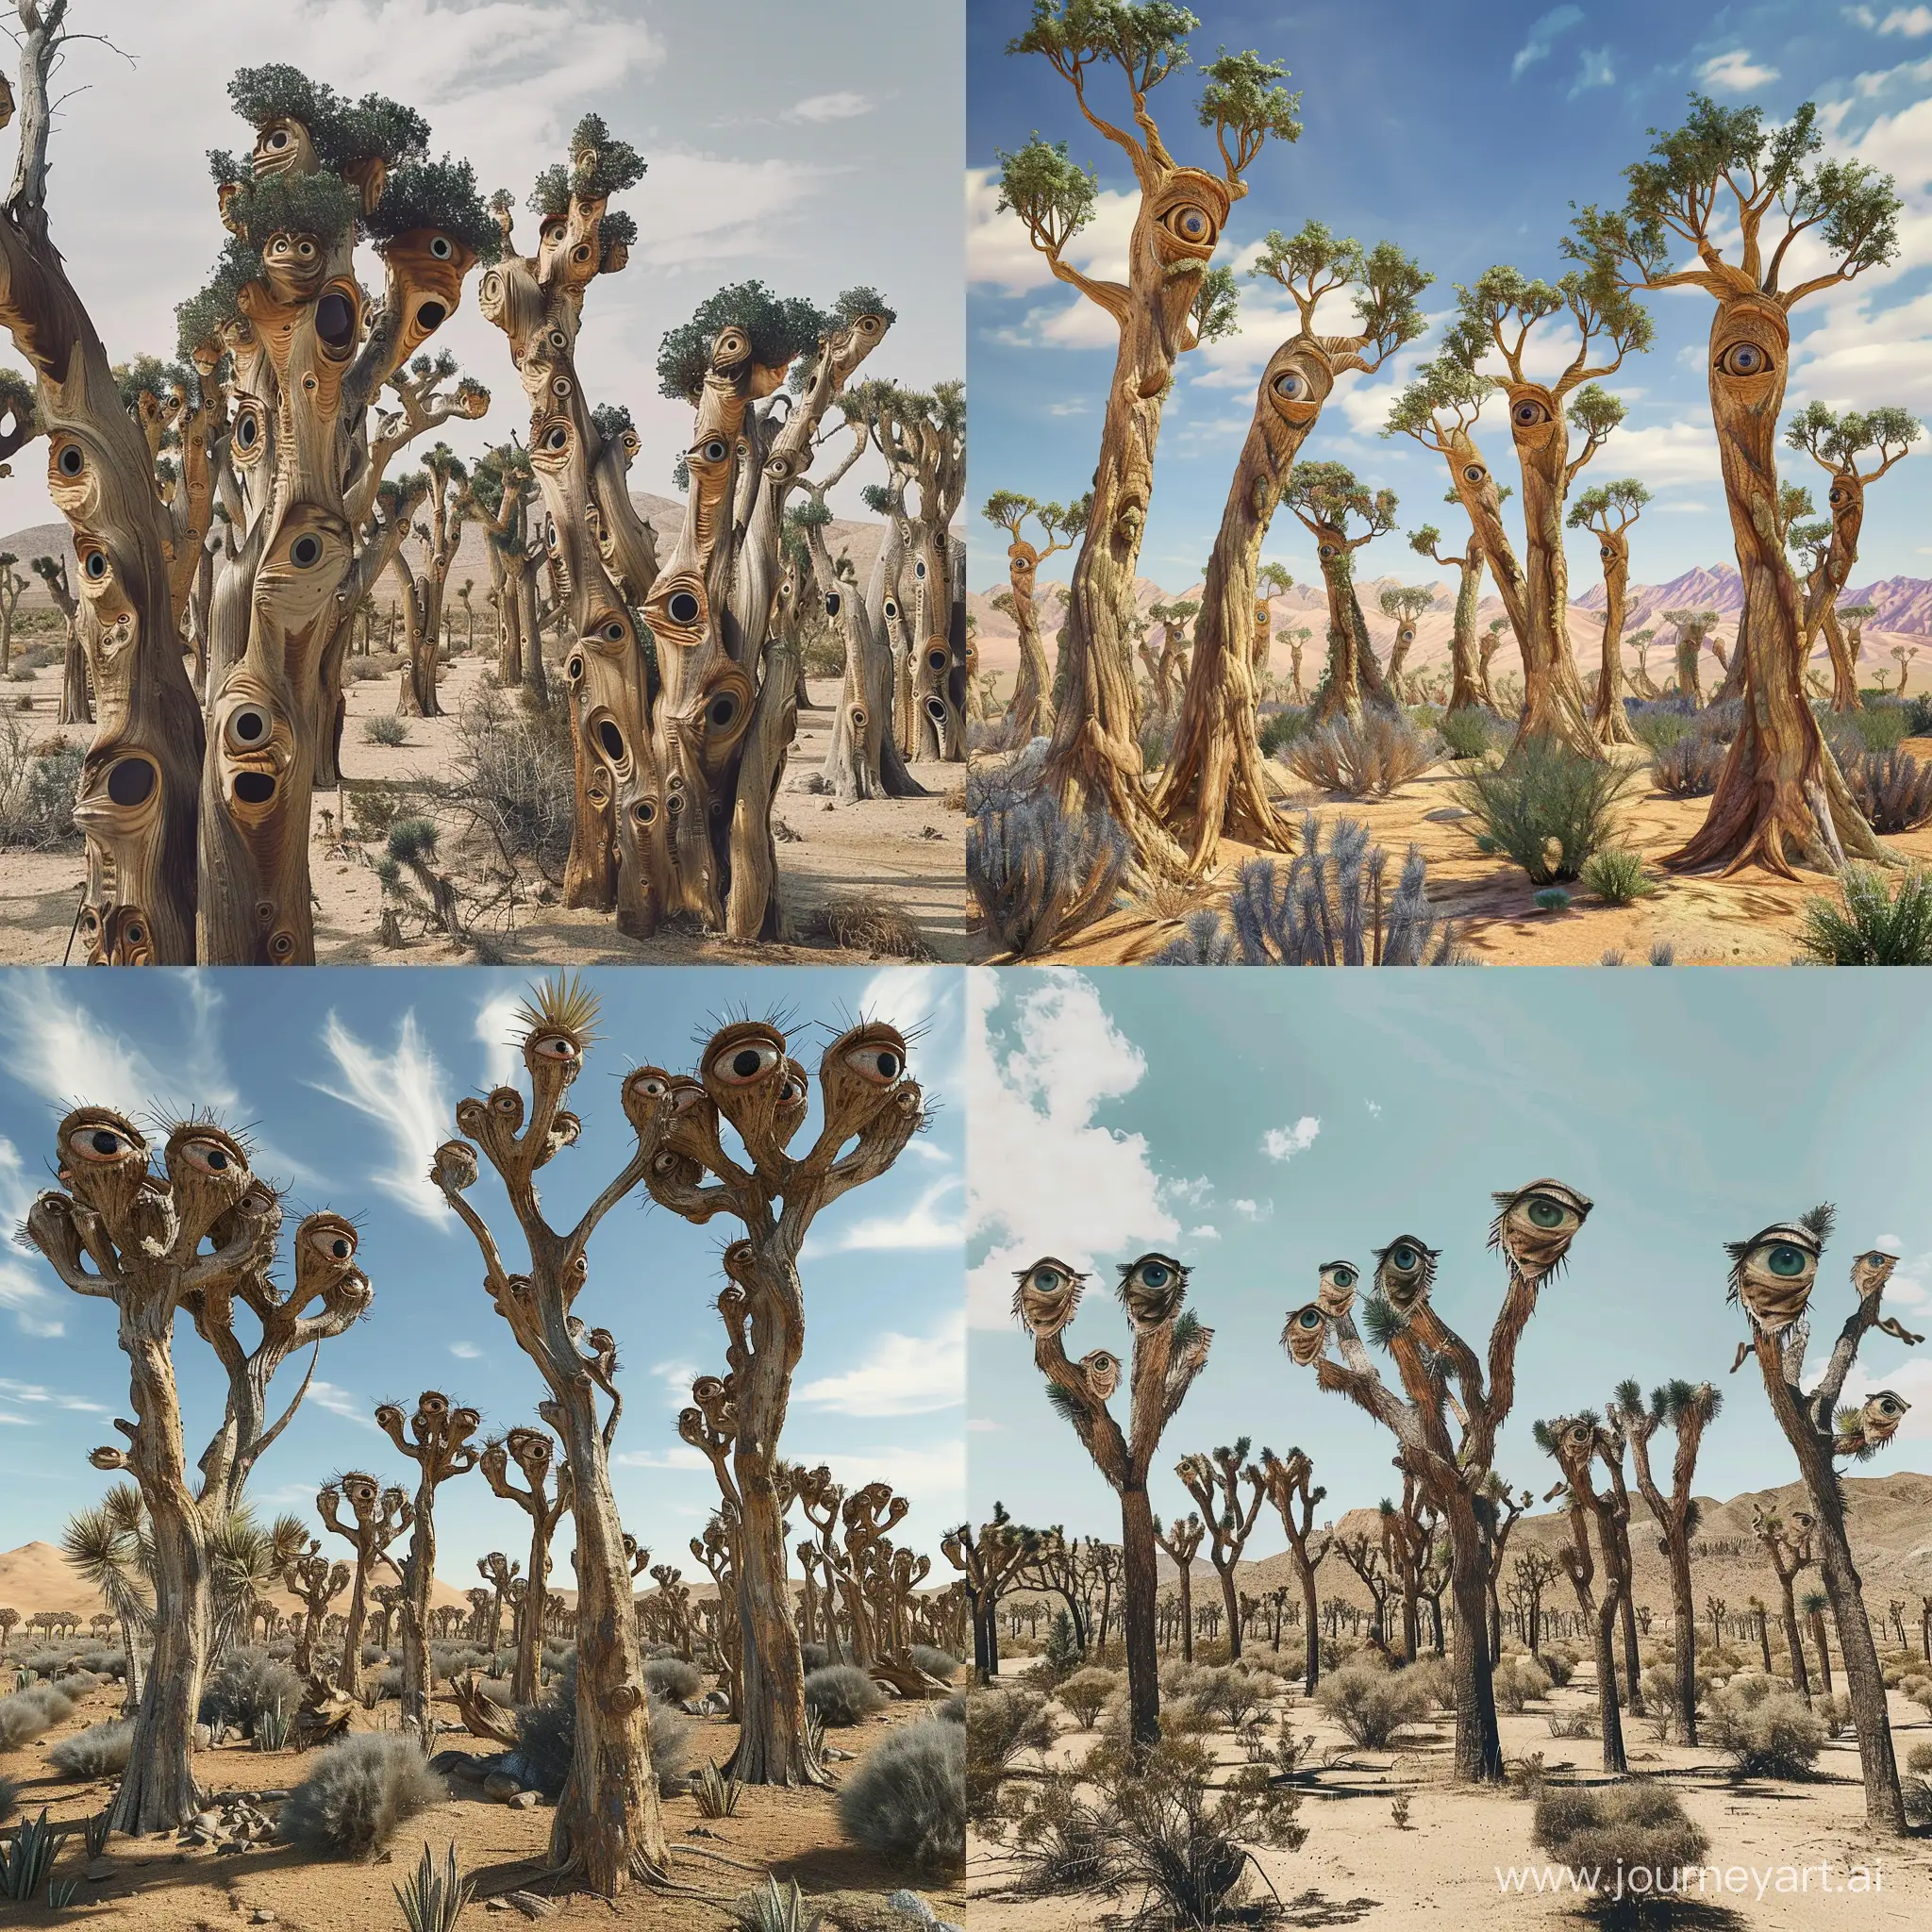 Desert filled with weird gaint trees that have eyes